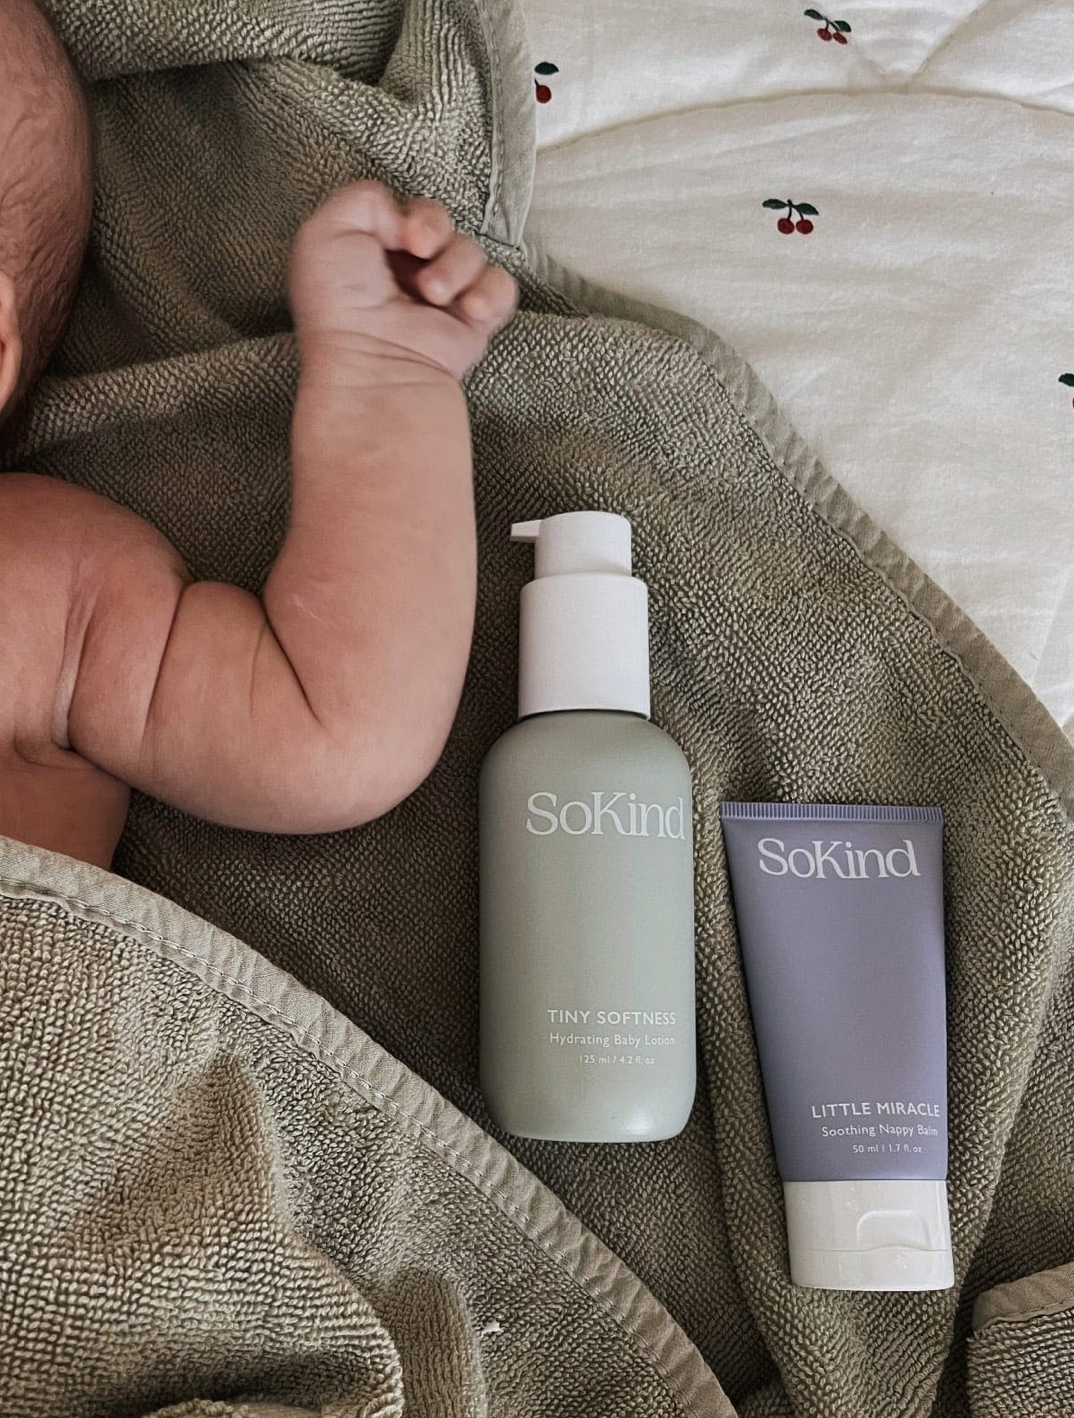 Little Miracle from SoKind, a soothing nappy balm and Tiny Softness from SoKind, a body lotion